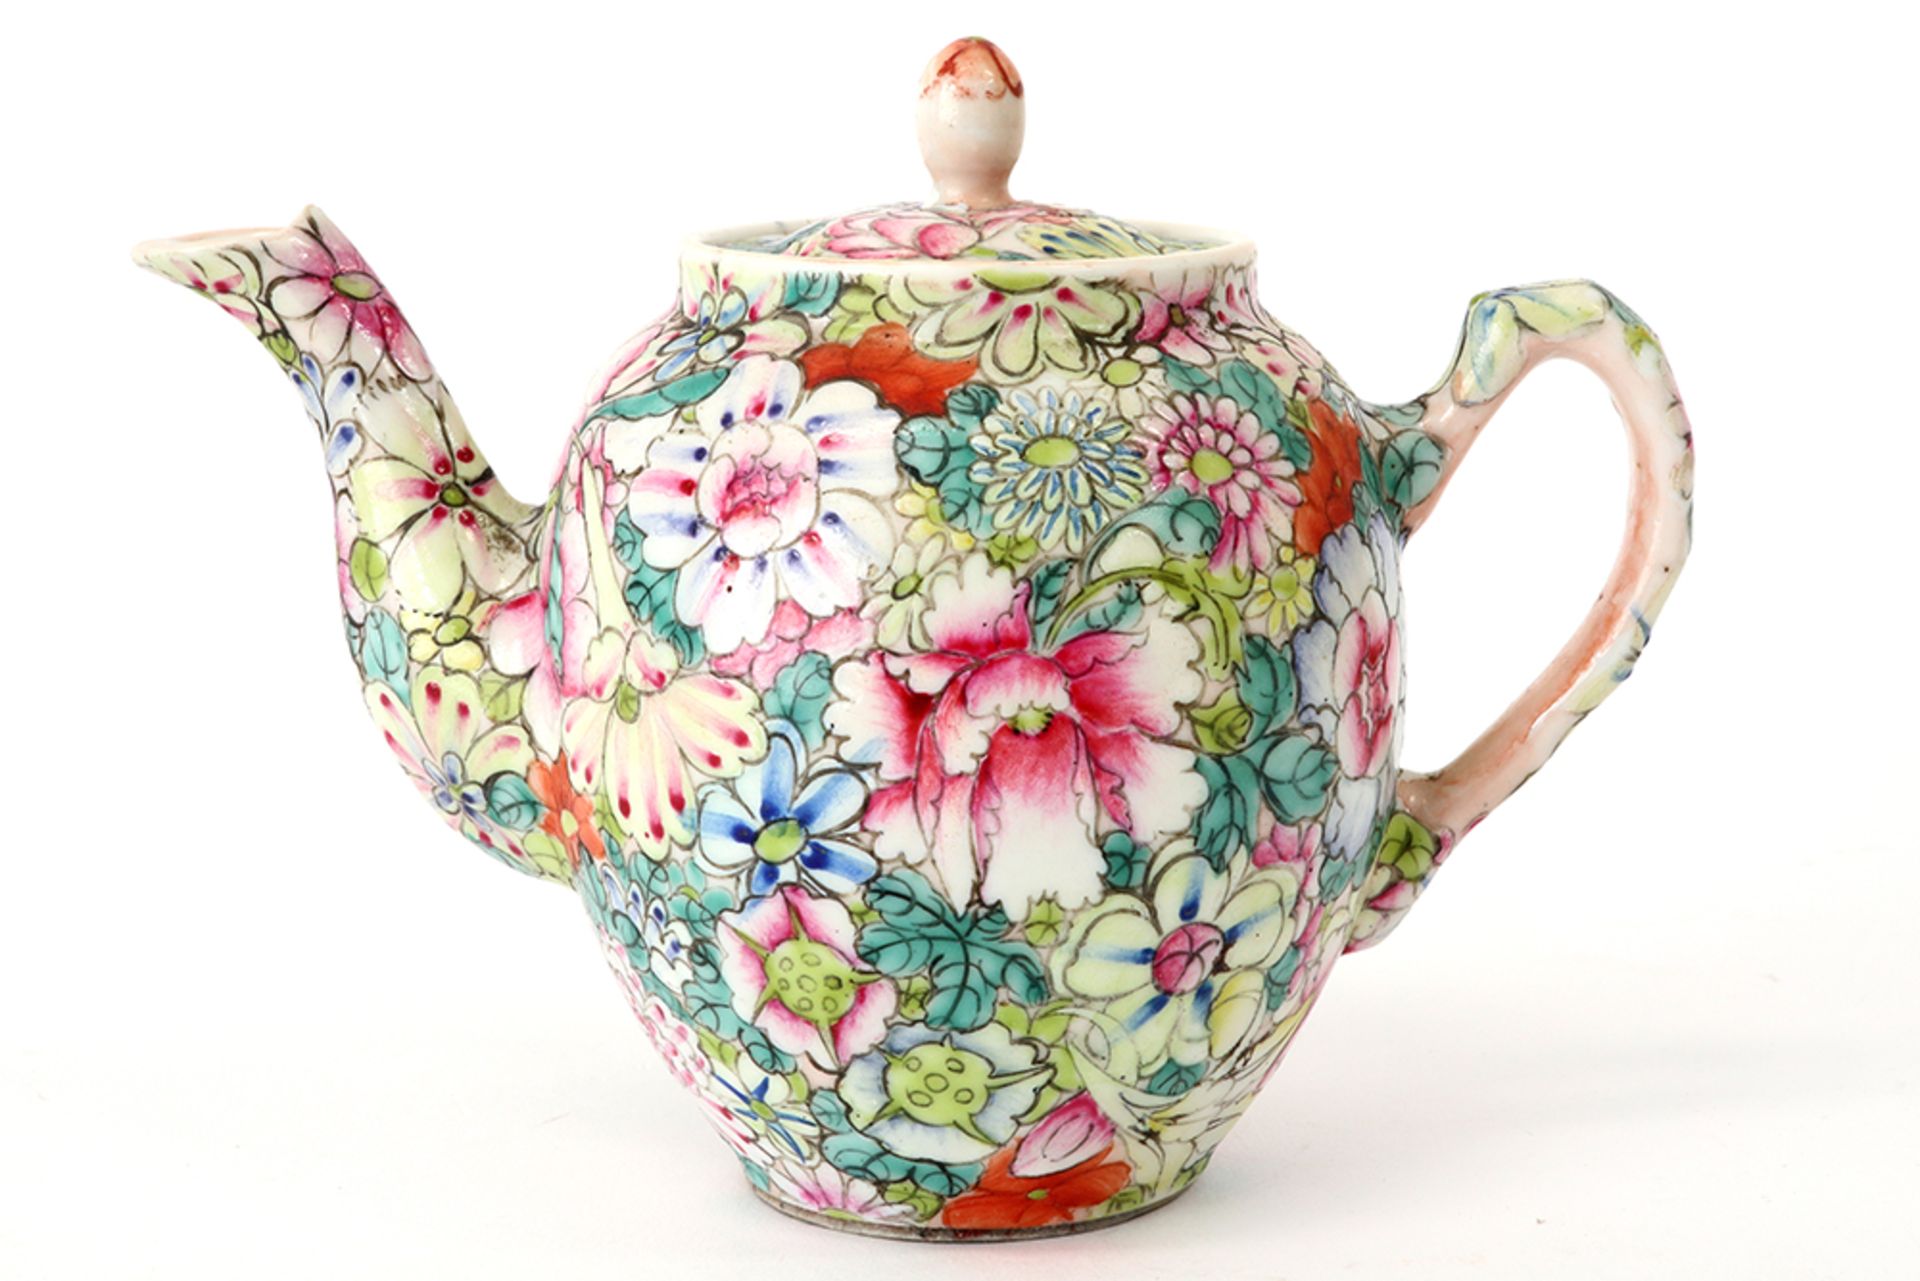 antique Chinese teapot in marked porcelain with a 'mille fiori' - decor || Antiek Chinees